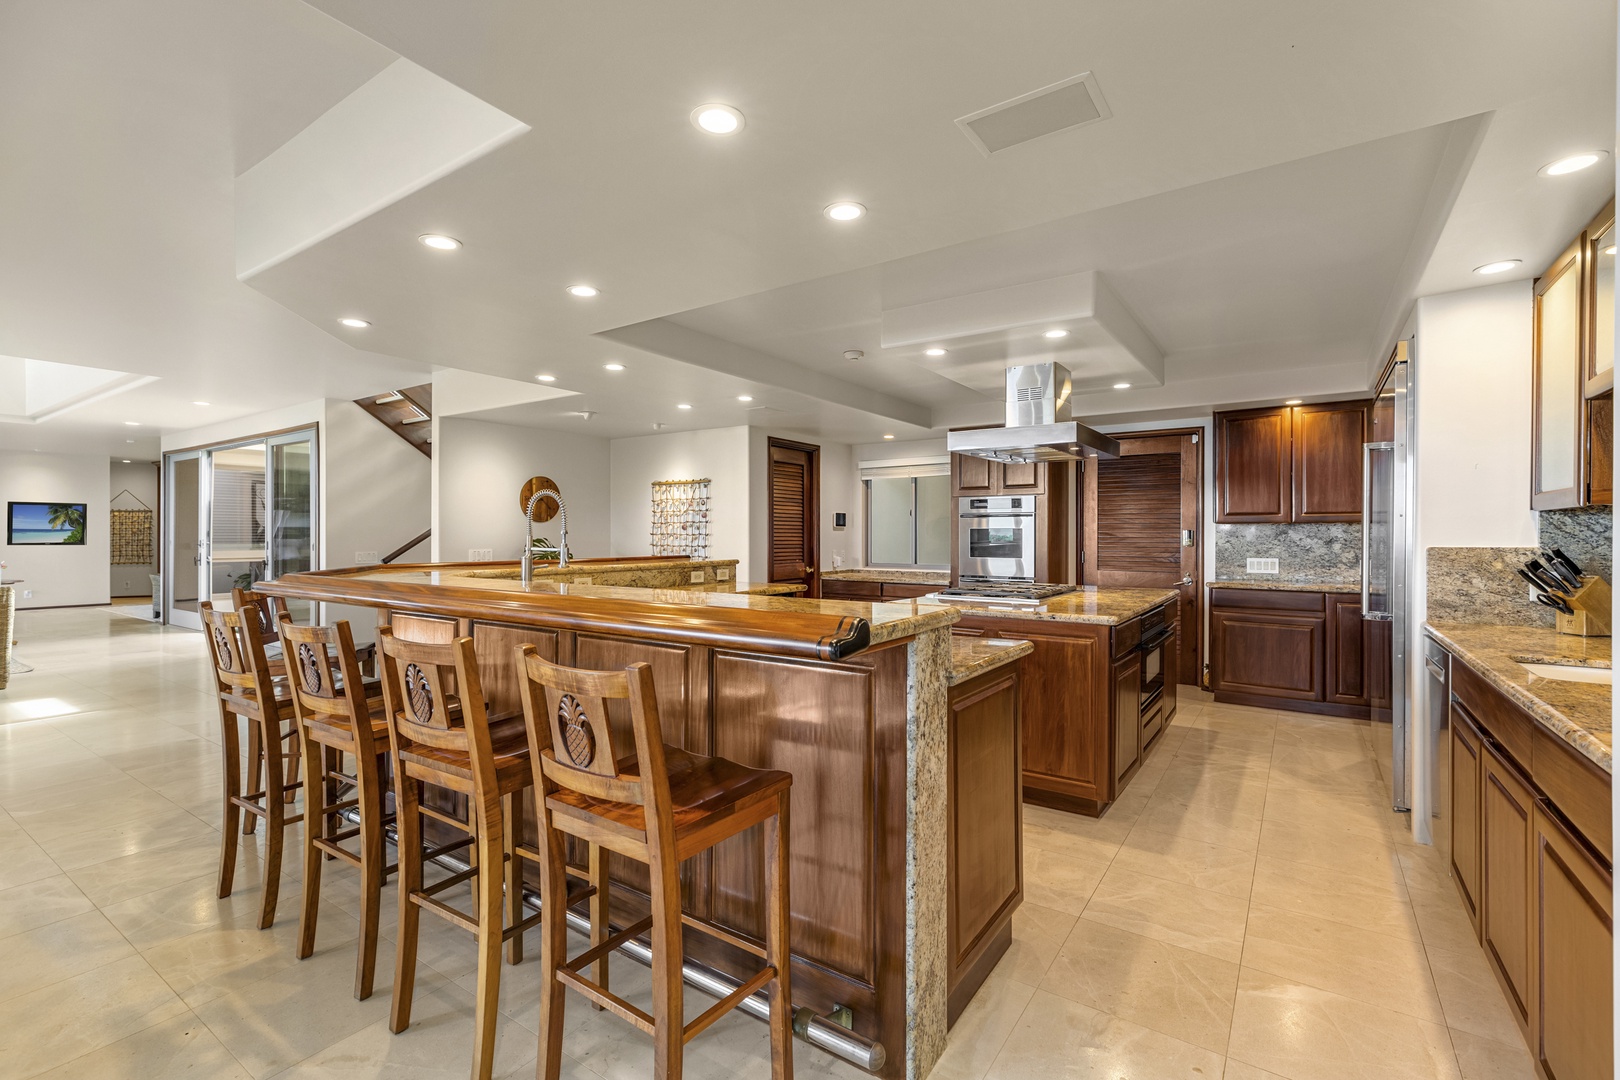 Kailua Vacation Rentals, Mokulua Sunrise - Each space in the house flows seamlessly into the next, as the open floor plan makes entertainment easy and inviting.